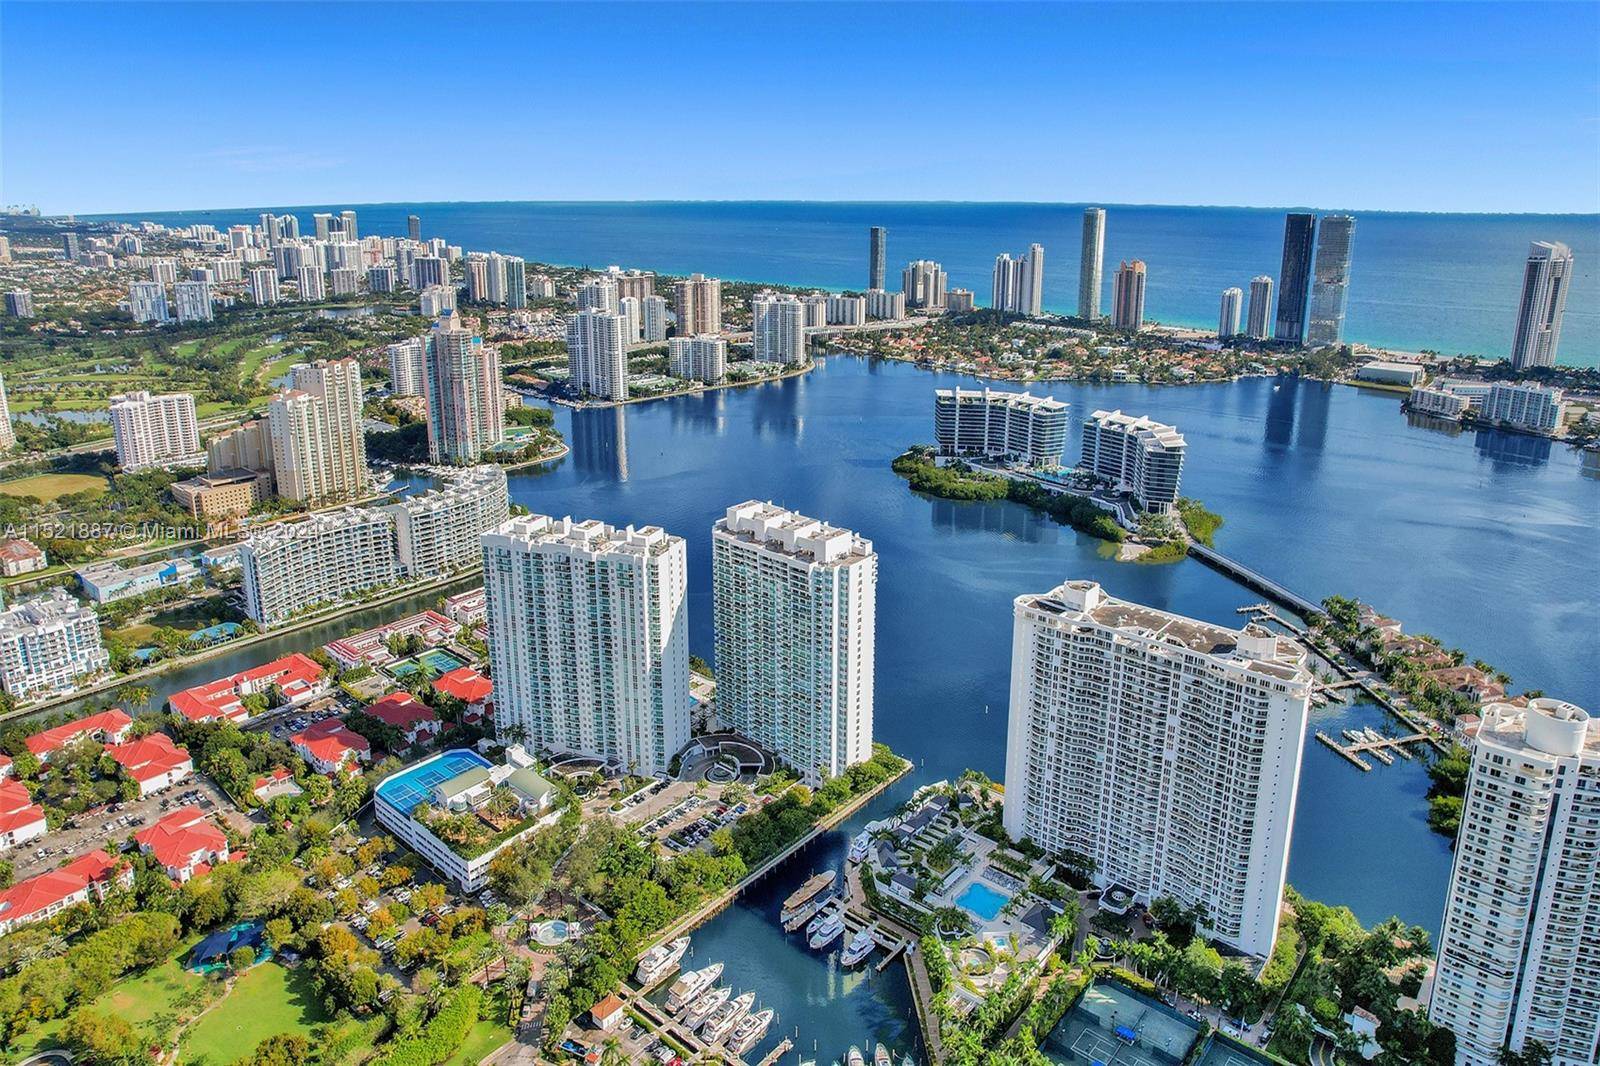 Come live in the best community in Aventura.